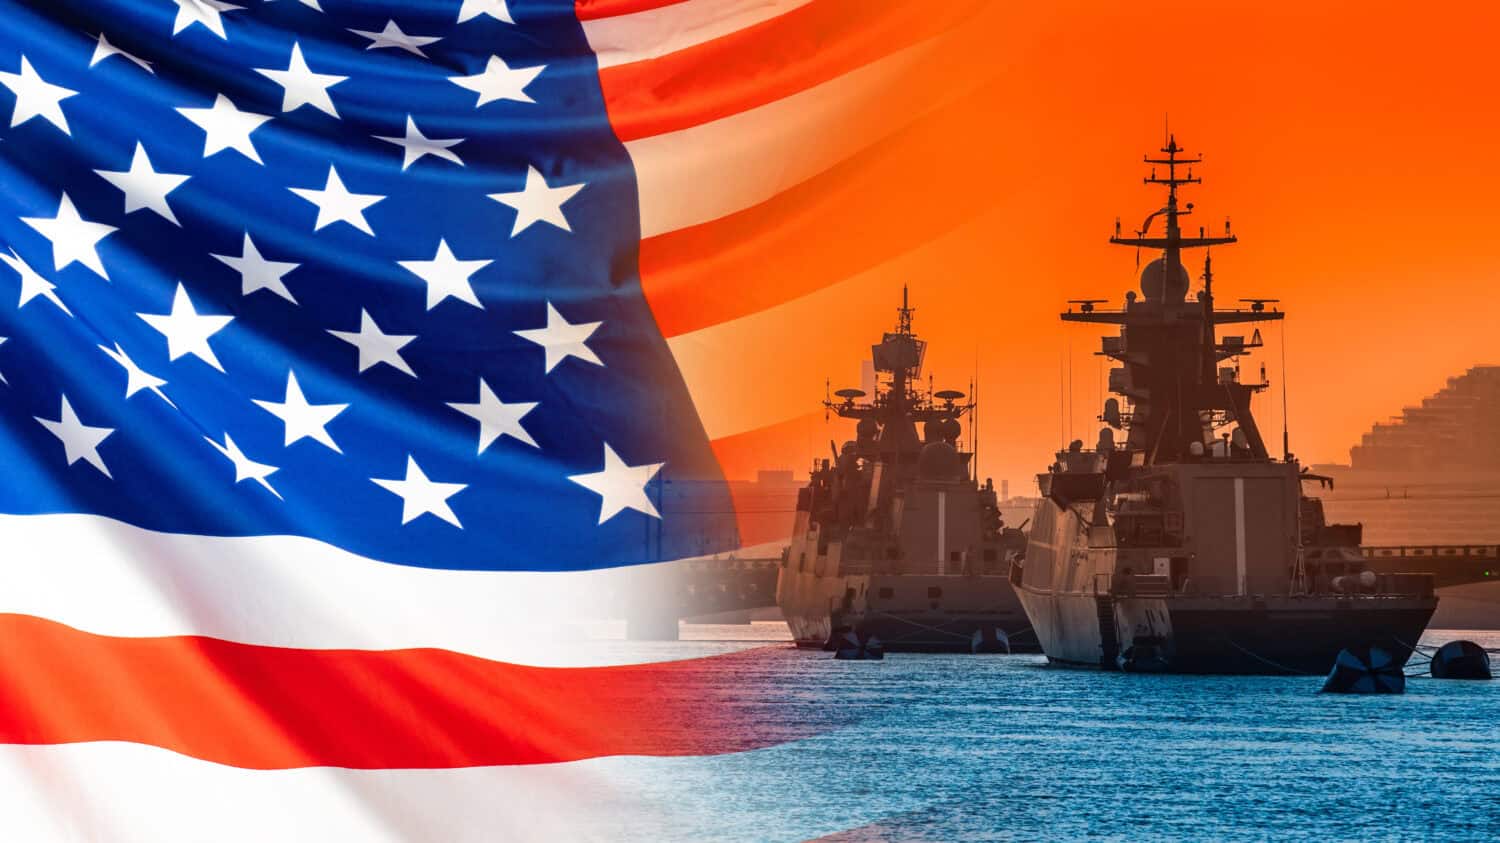 Moored warships on the background of the American flag. American fleet. Naval forces of the United States. The Navy of America. Equipment of the American army. Protecting America's water borders.